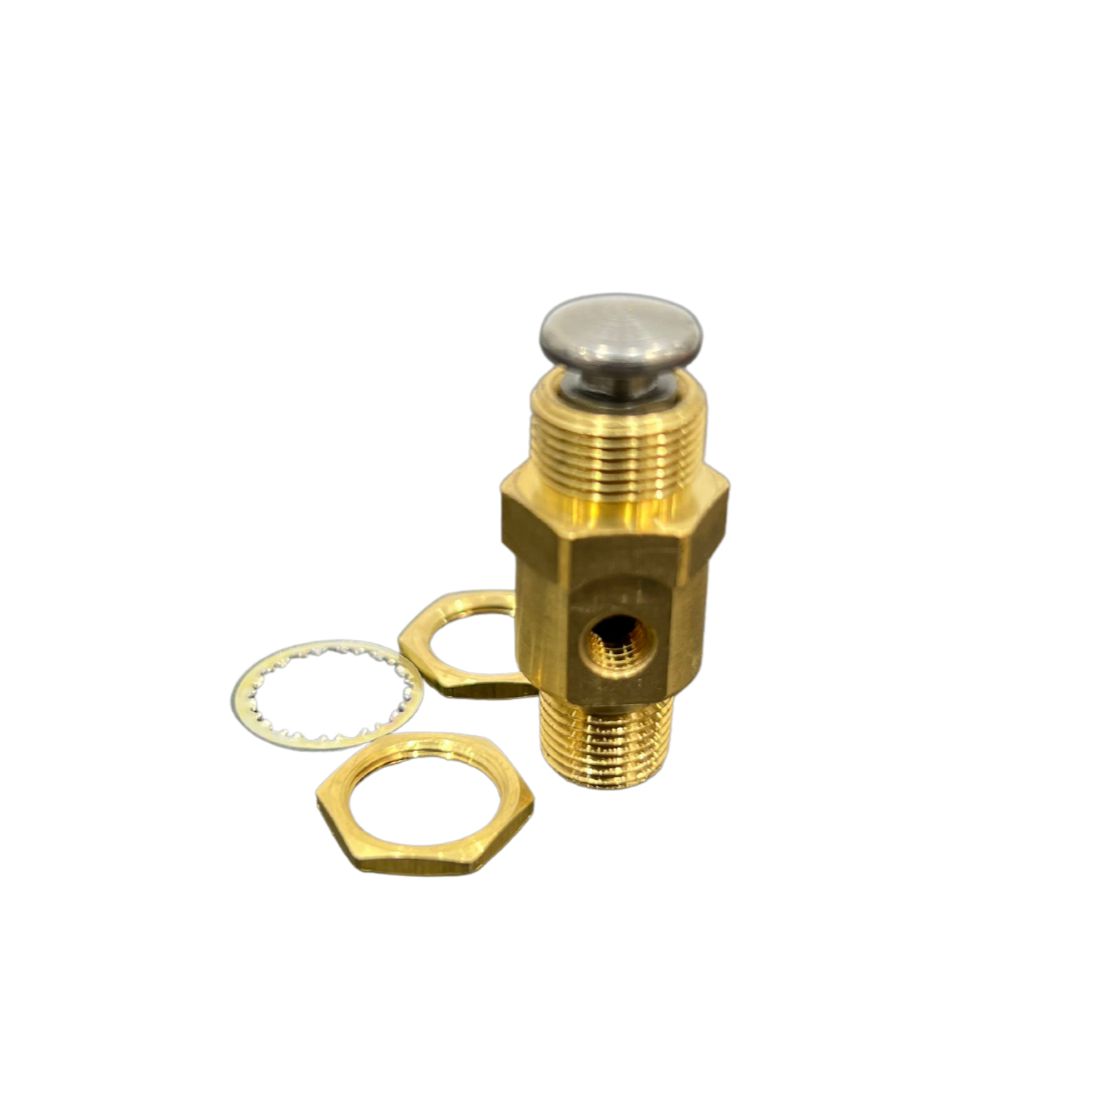 Push button valve with port and threaded ends. Includes 3 washers